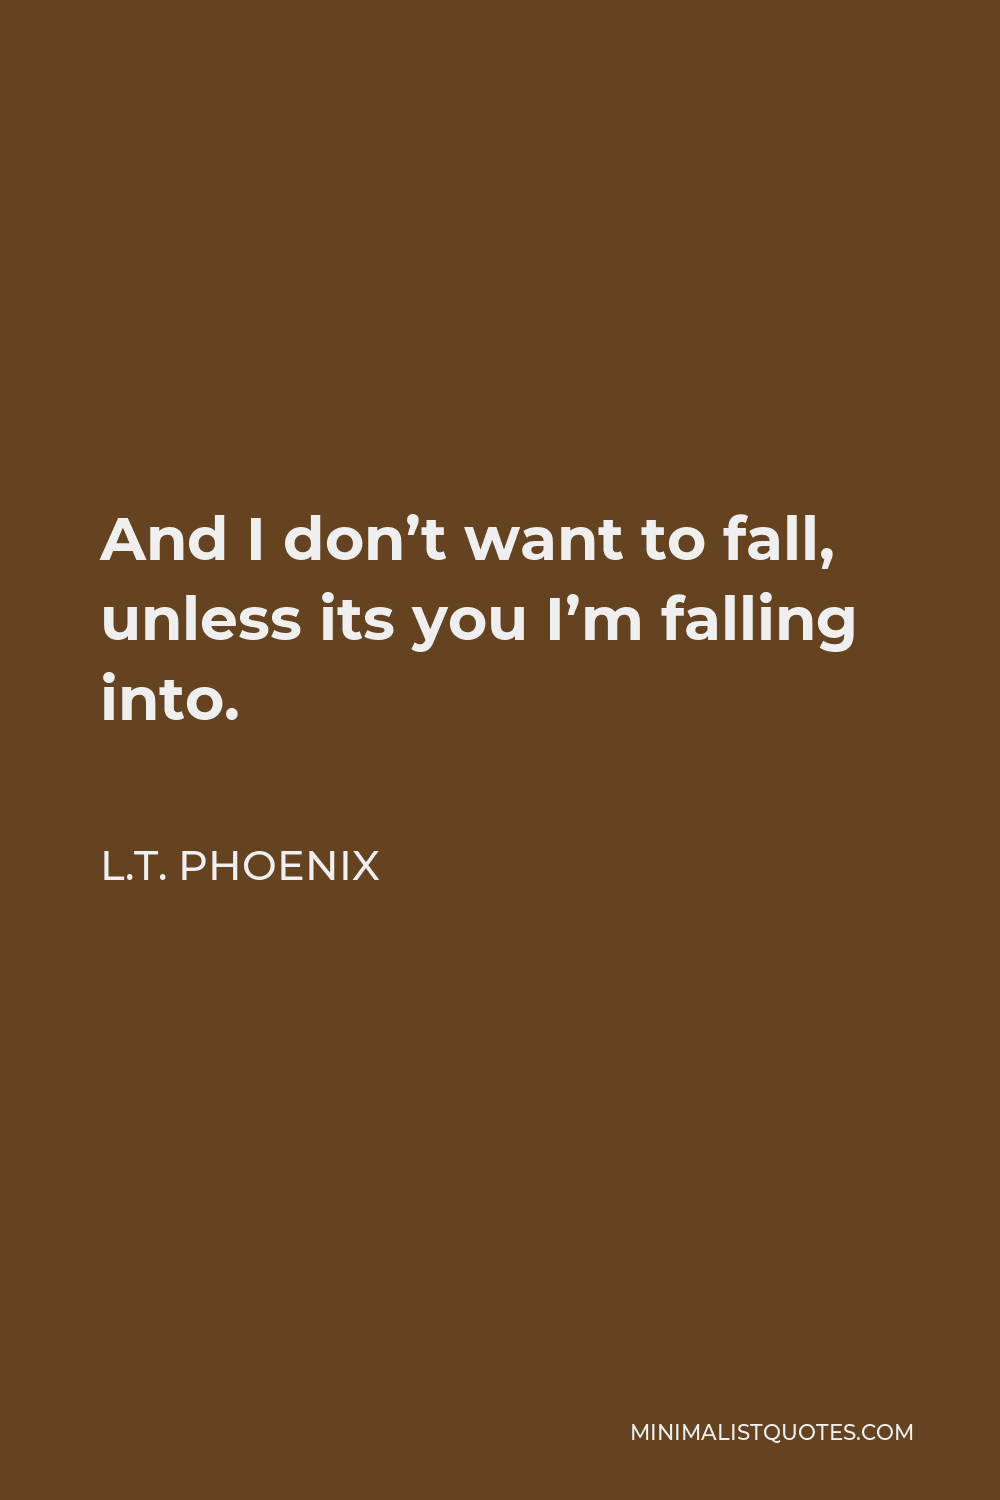 L.T. Phoenix Quote - And I don’t want to fall, unless its you I’m falling into.